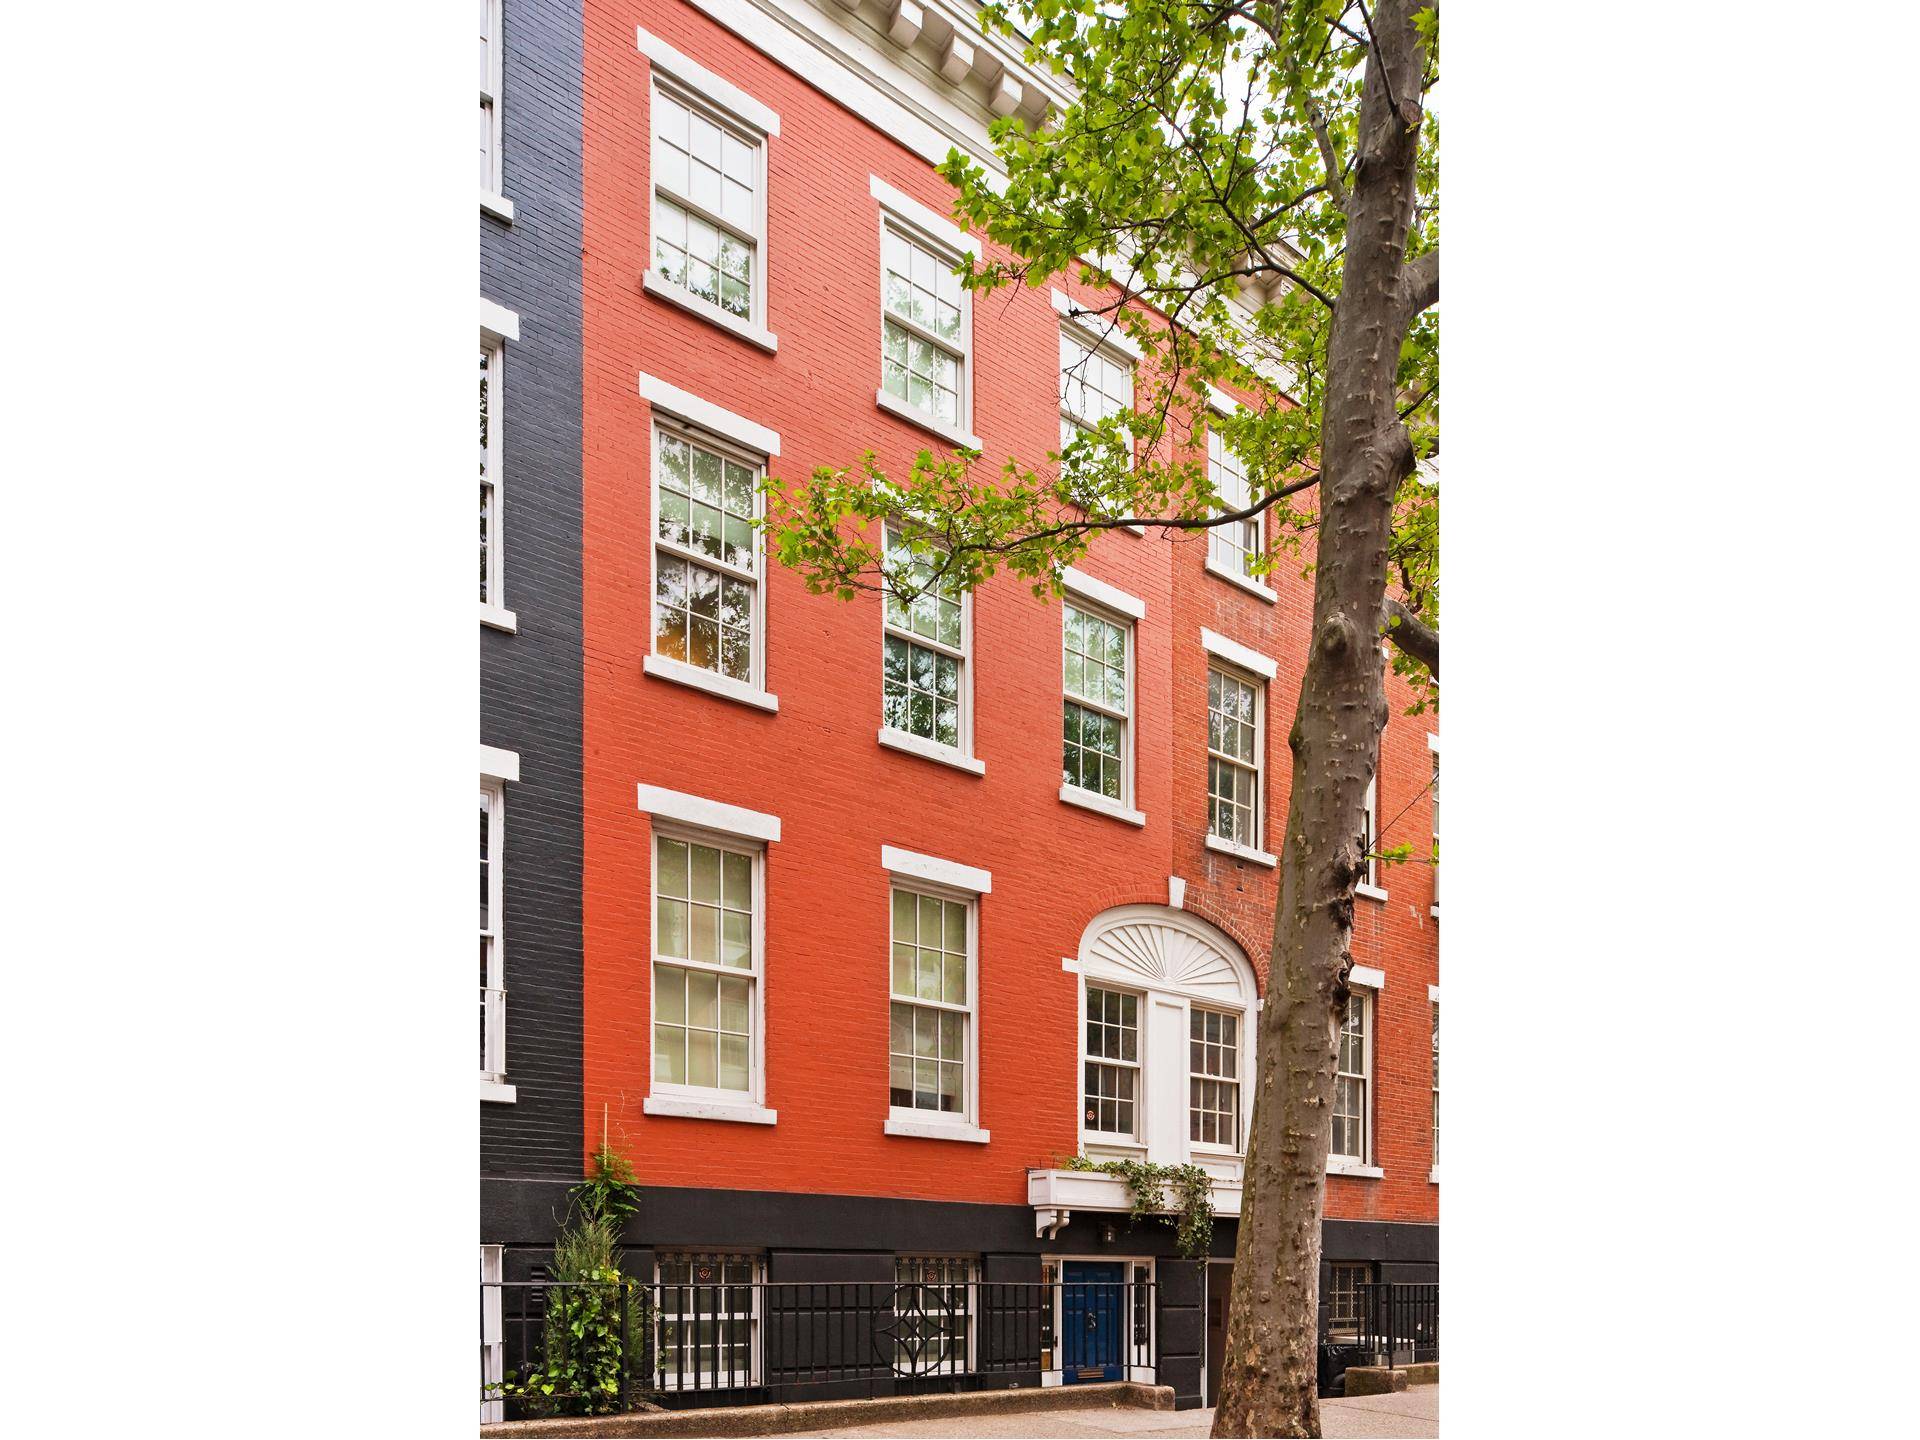 A quiet and secret enclave in the heart of Greenwich Village for over 100 years, the houses on Sullivan MacDougal Gardens are an oasis amidst the excitement of downtown Manhattan.